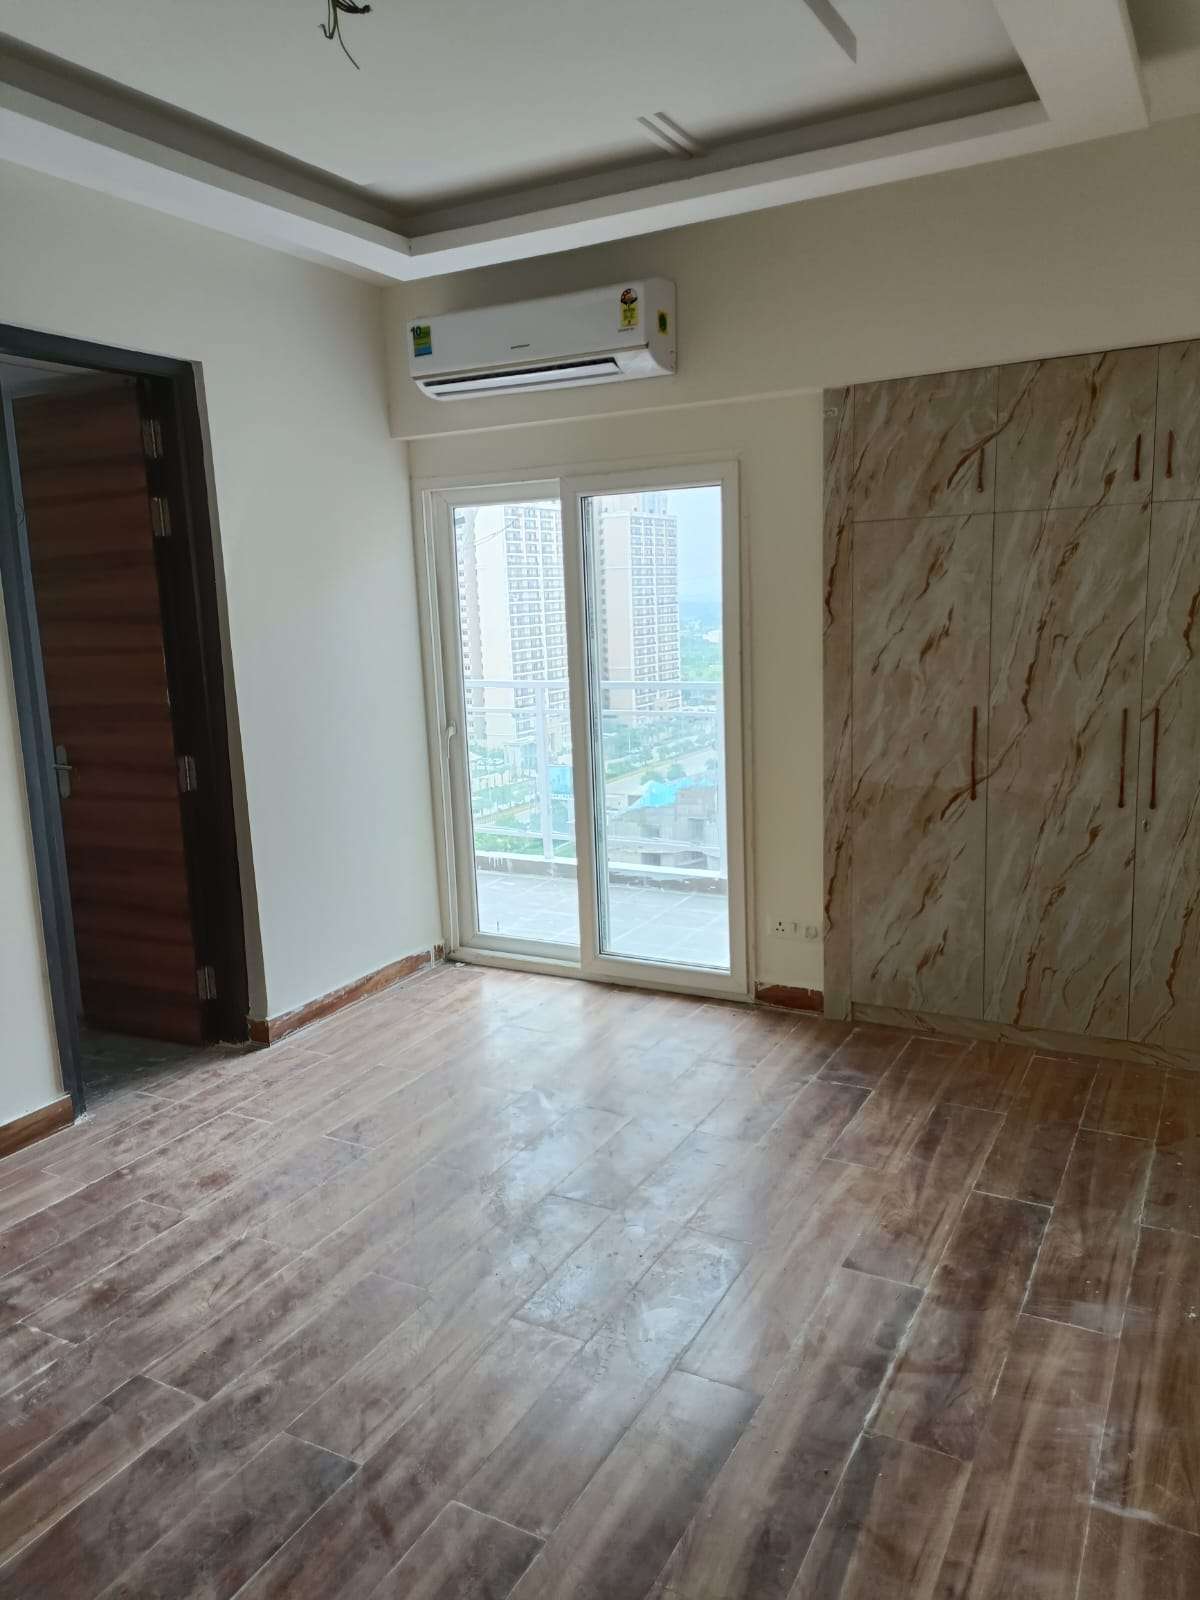 3 BHK Apartment For Rent in Kalyan East Thane 6143843